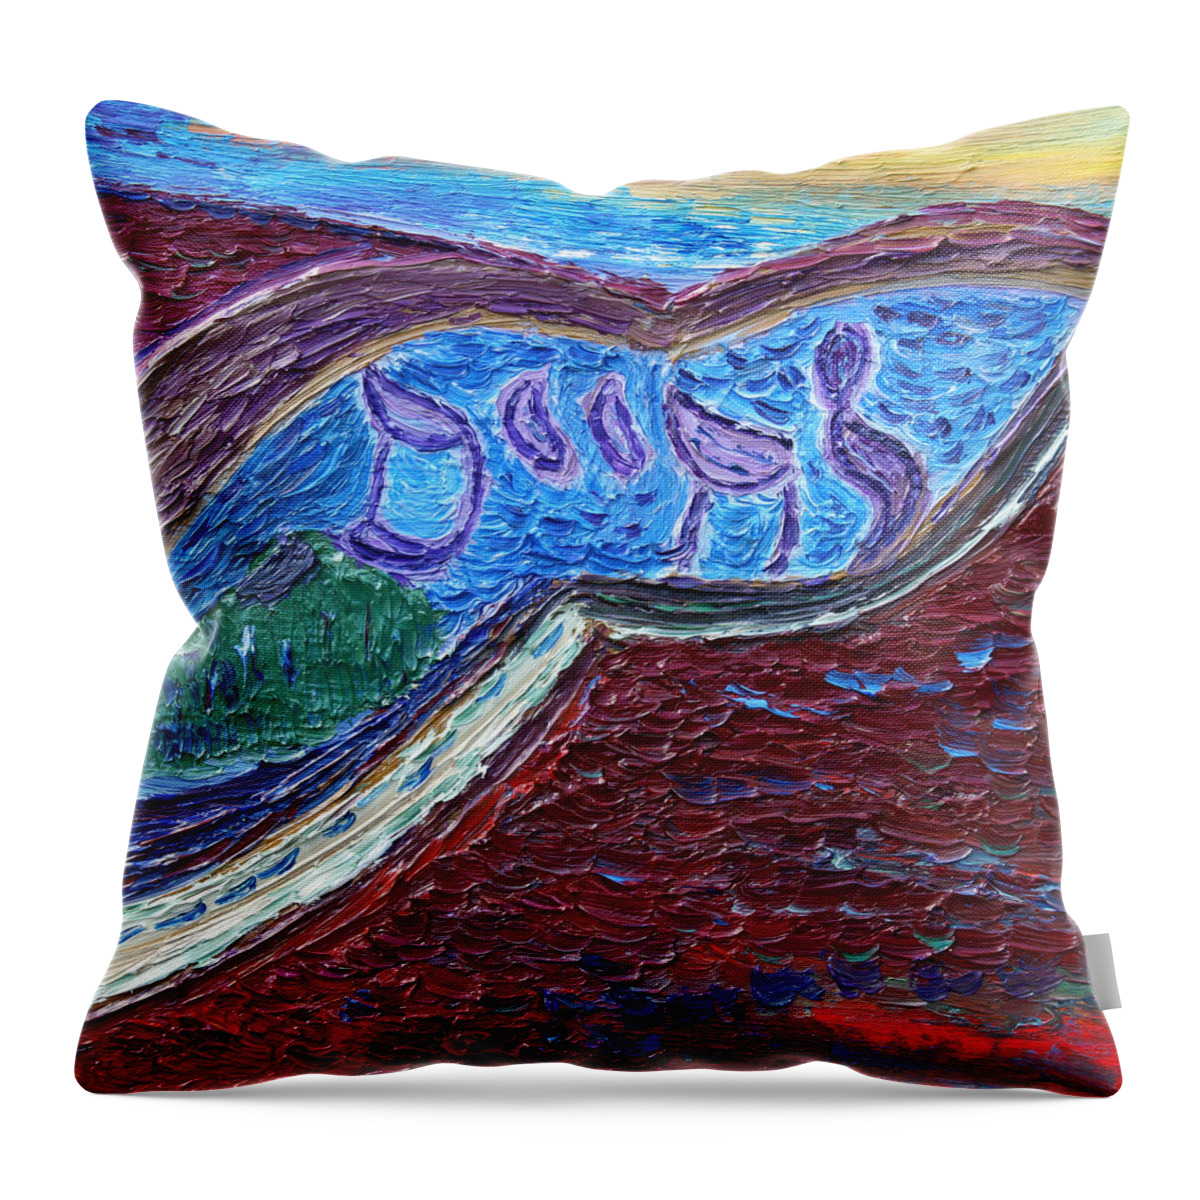 Celebration Throw Pillow featuring the painting Celebration of Life by Vadim Levin